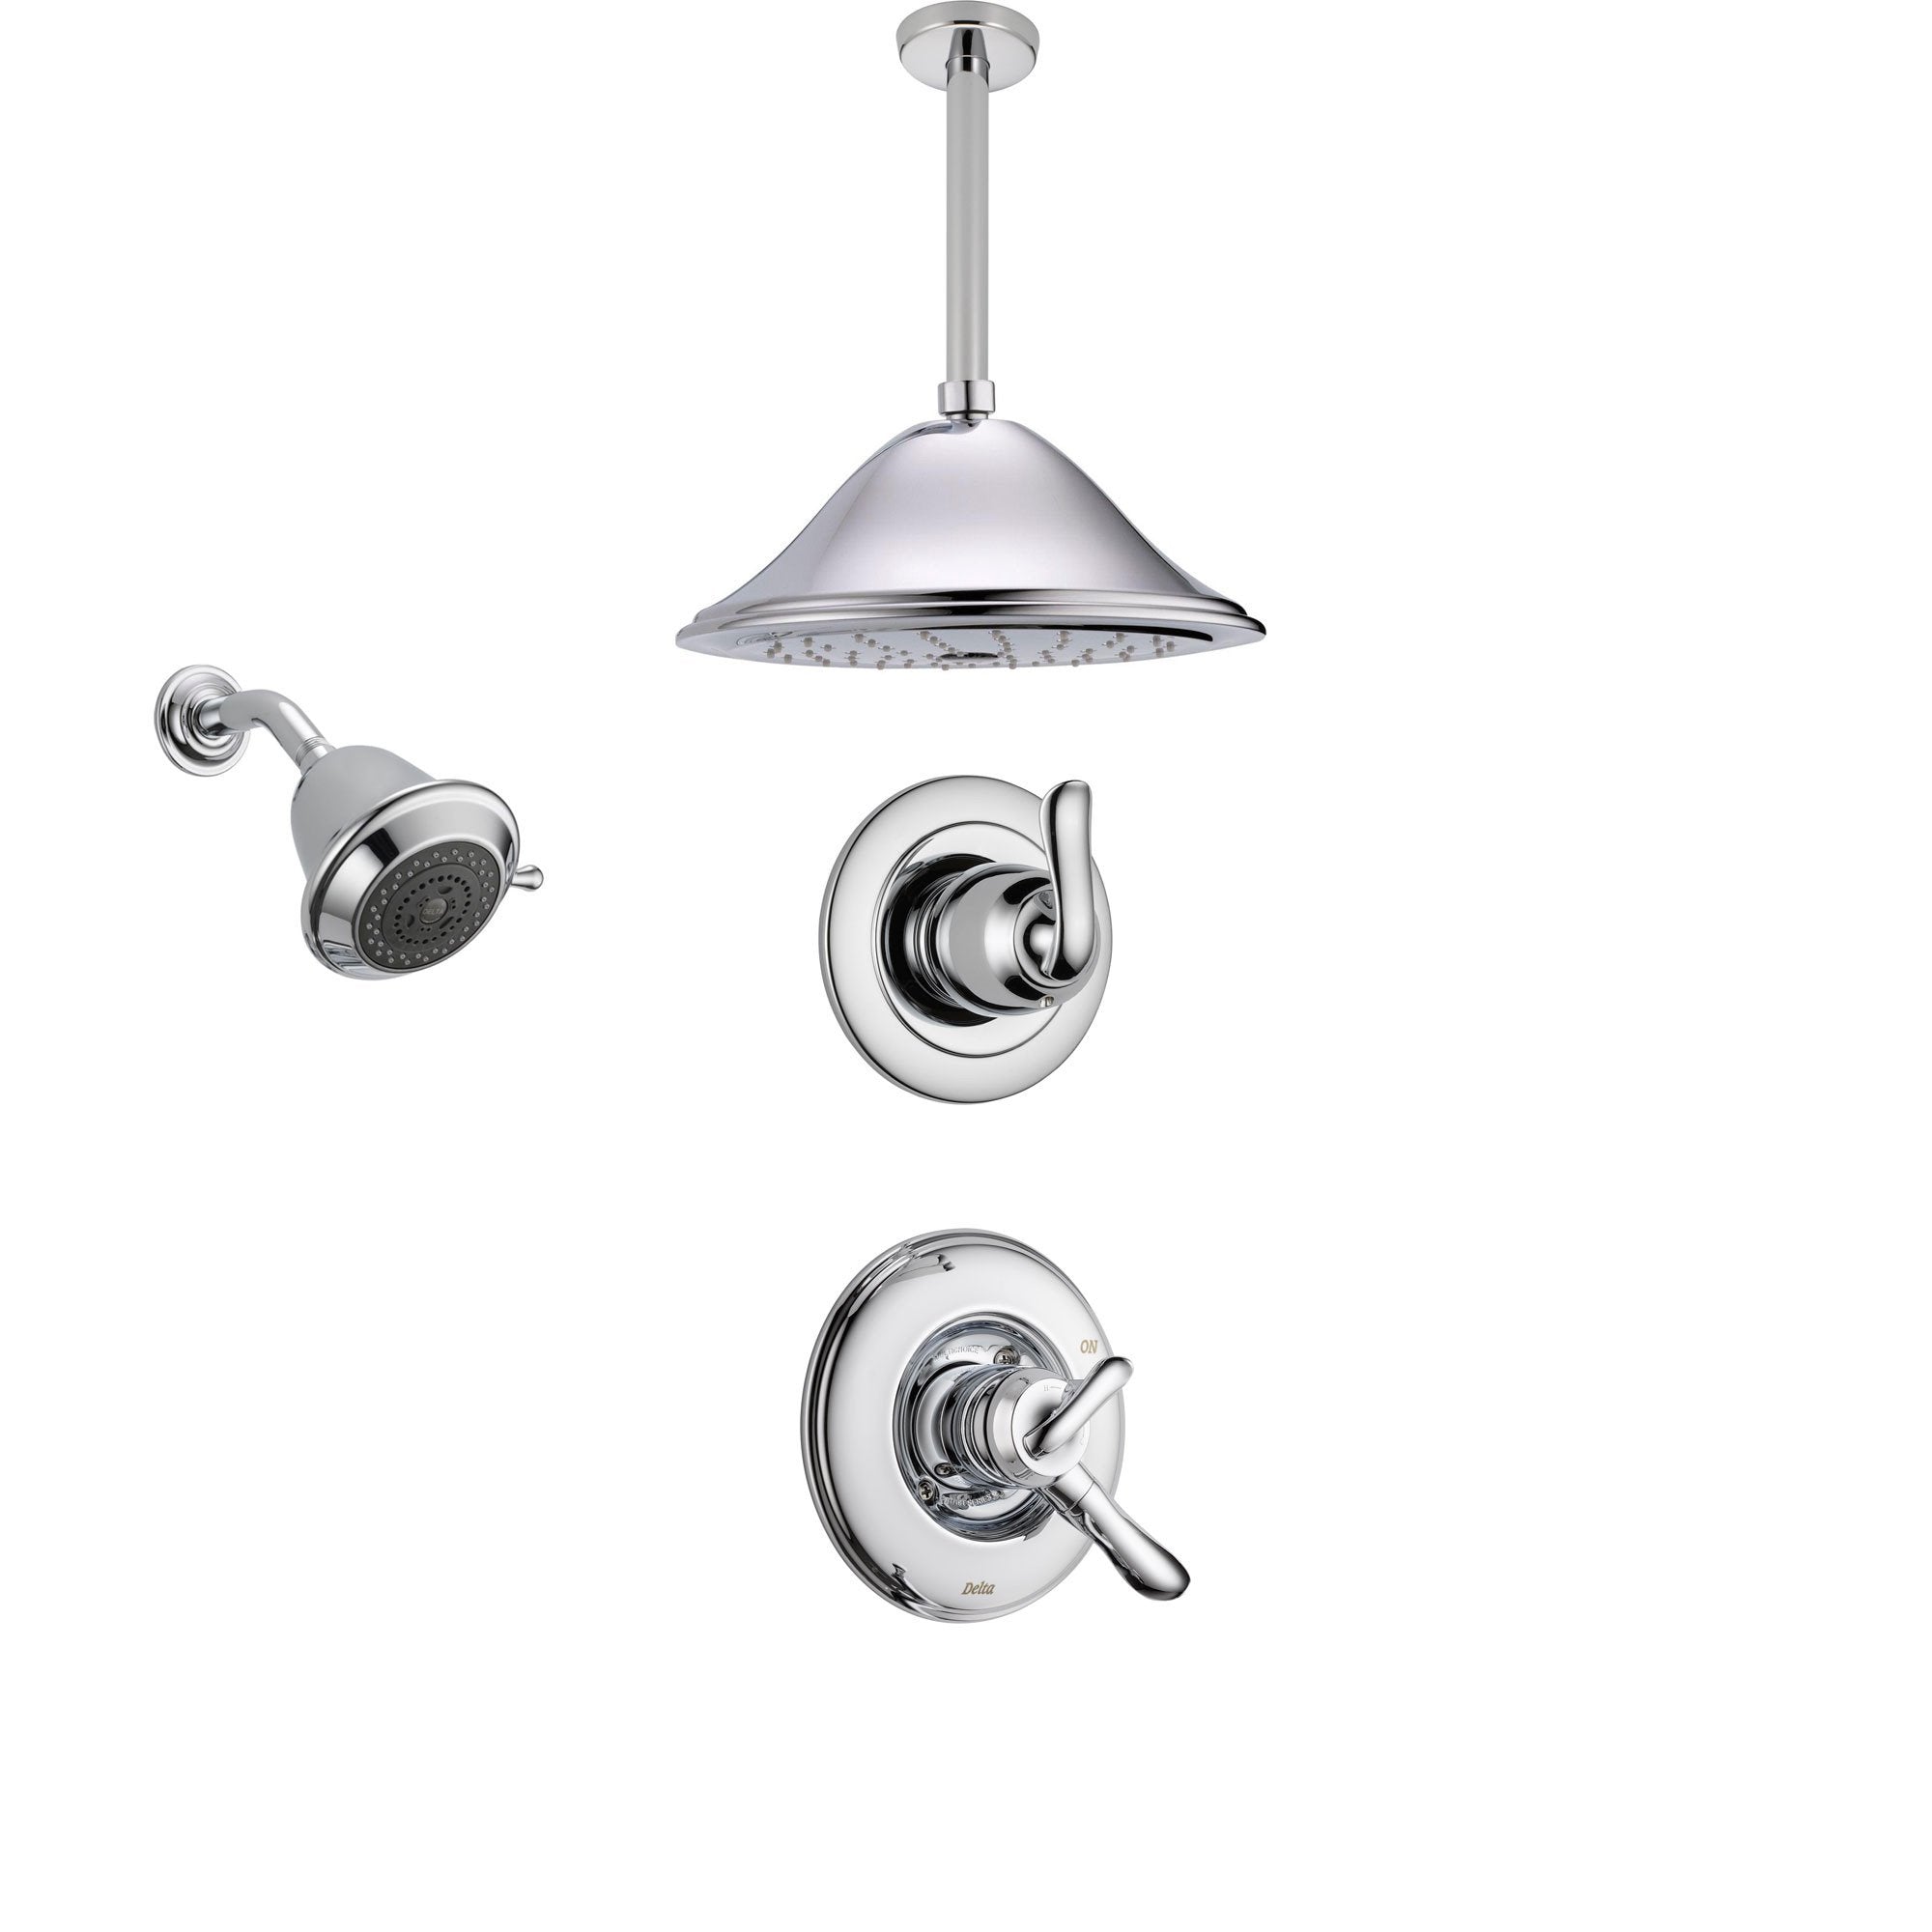 Delta Linden Chrome Shower System with Dual Control Shower Handle, 3-setting Diverter, Large Ceiling Mount Rain Shower Head, and Wall Mount Showerhead SS179485